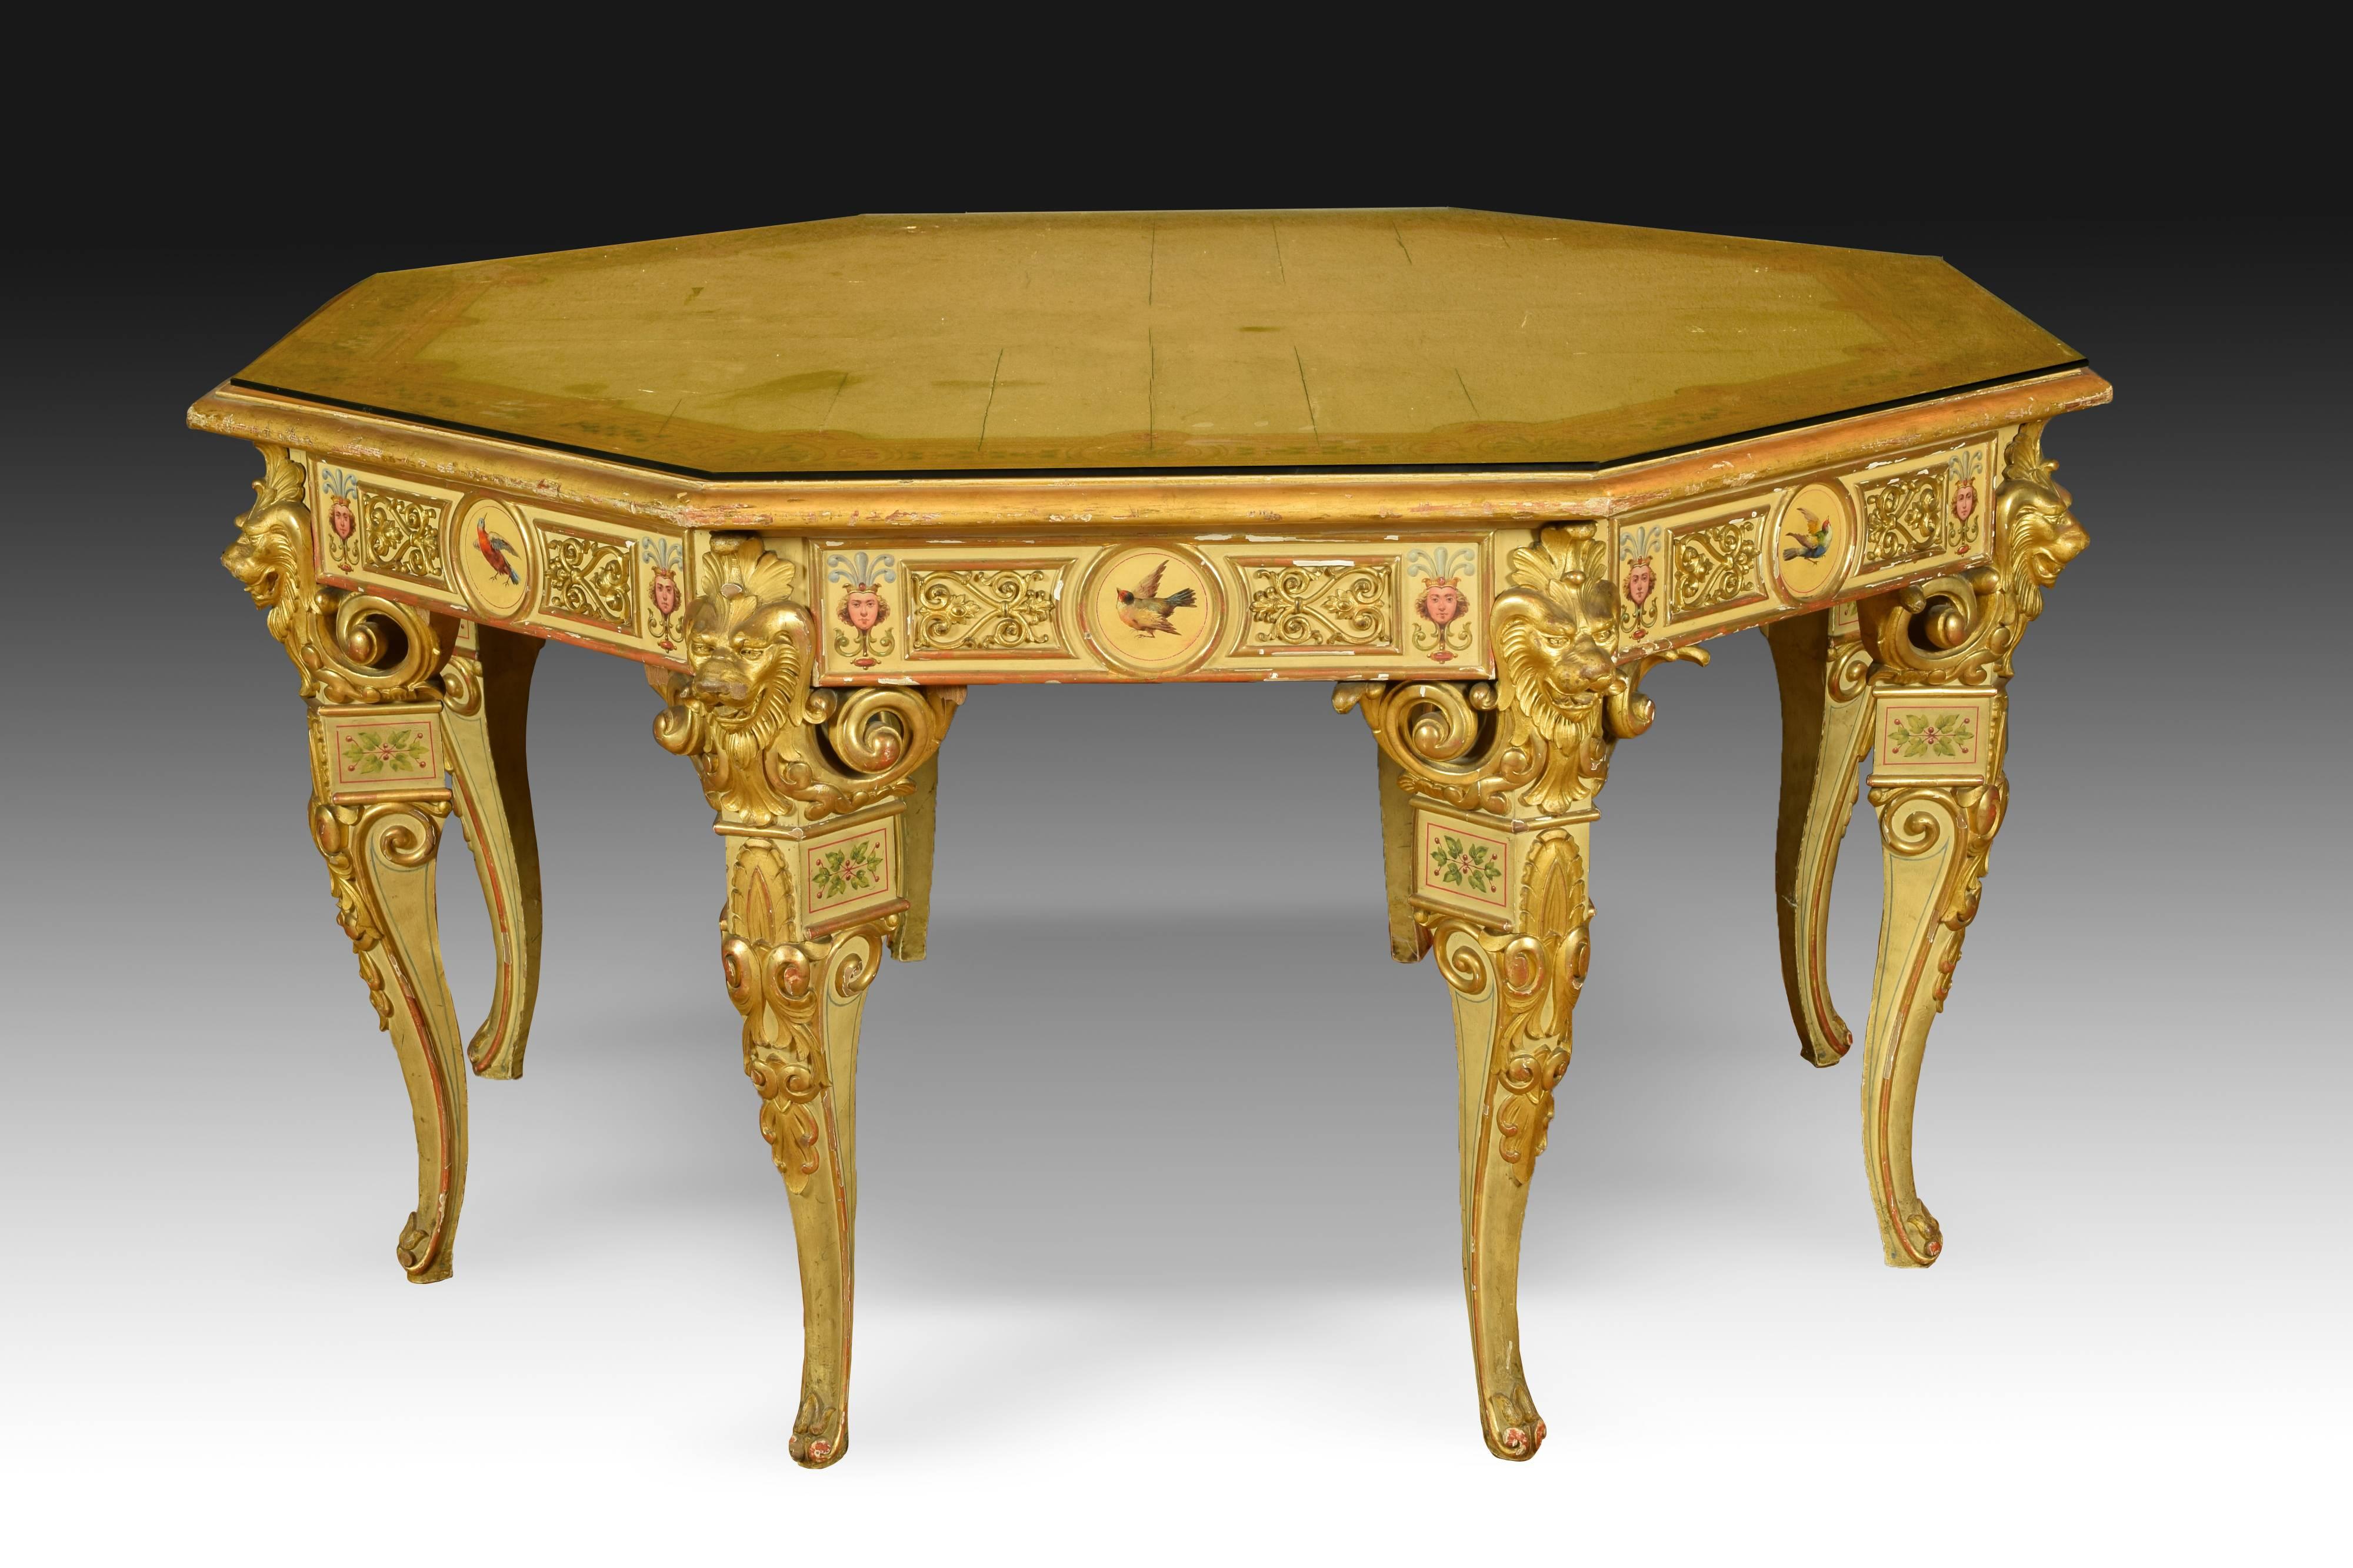 This set of furniture consists of six chairs with arms and back and an octagonal high table made of carved wood, polychrome and gold. The chairs are almost equal to each other (only two of them have the bird painted on the backrest facing to the